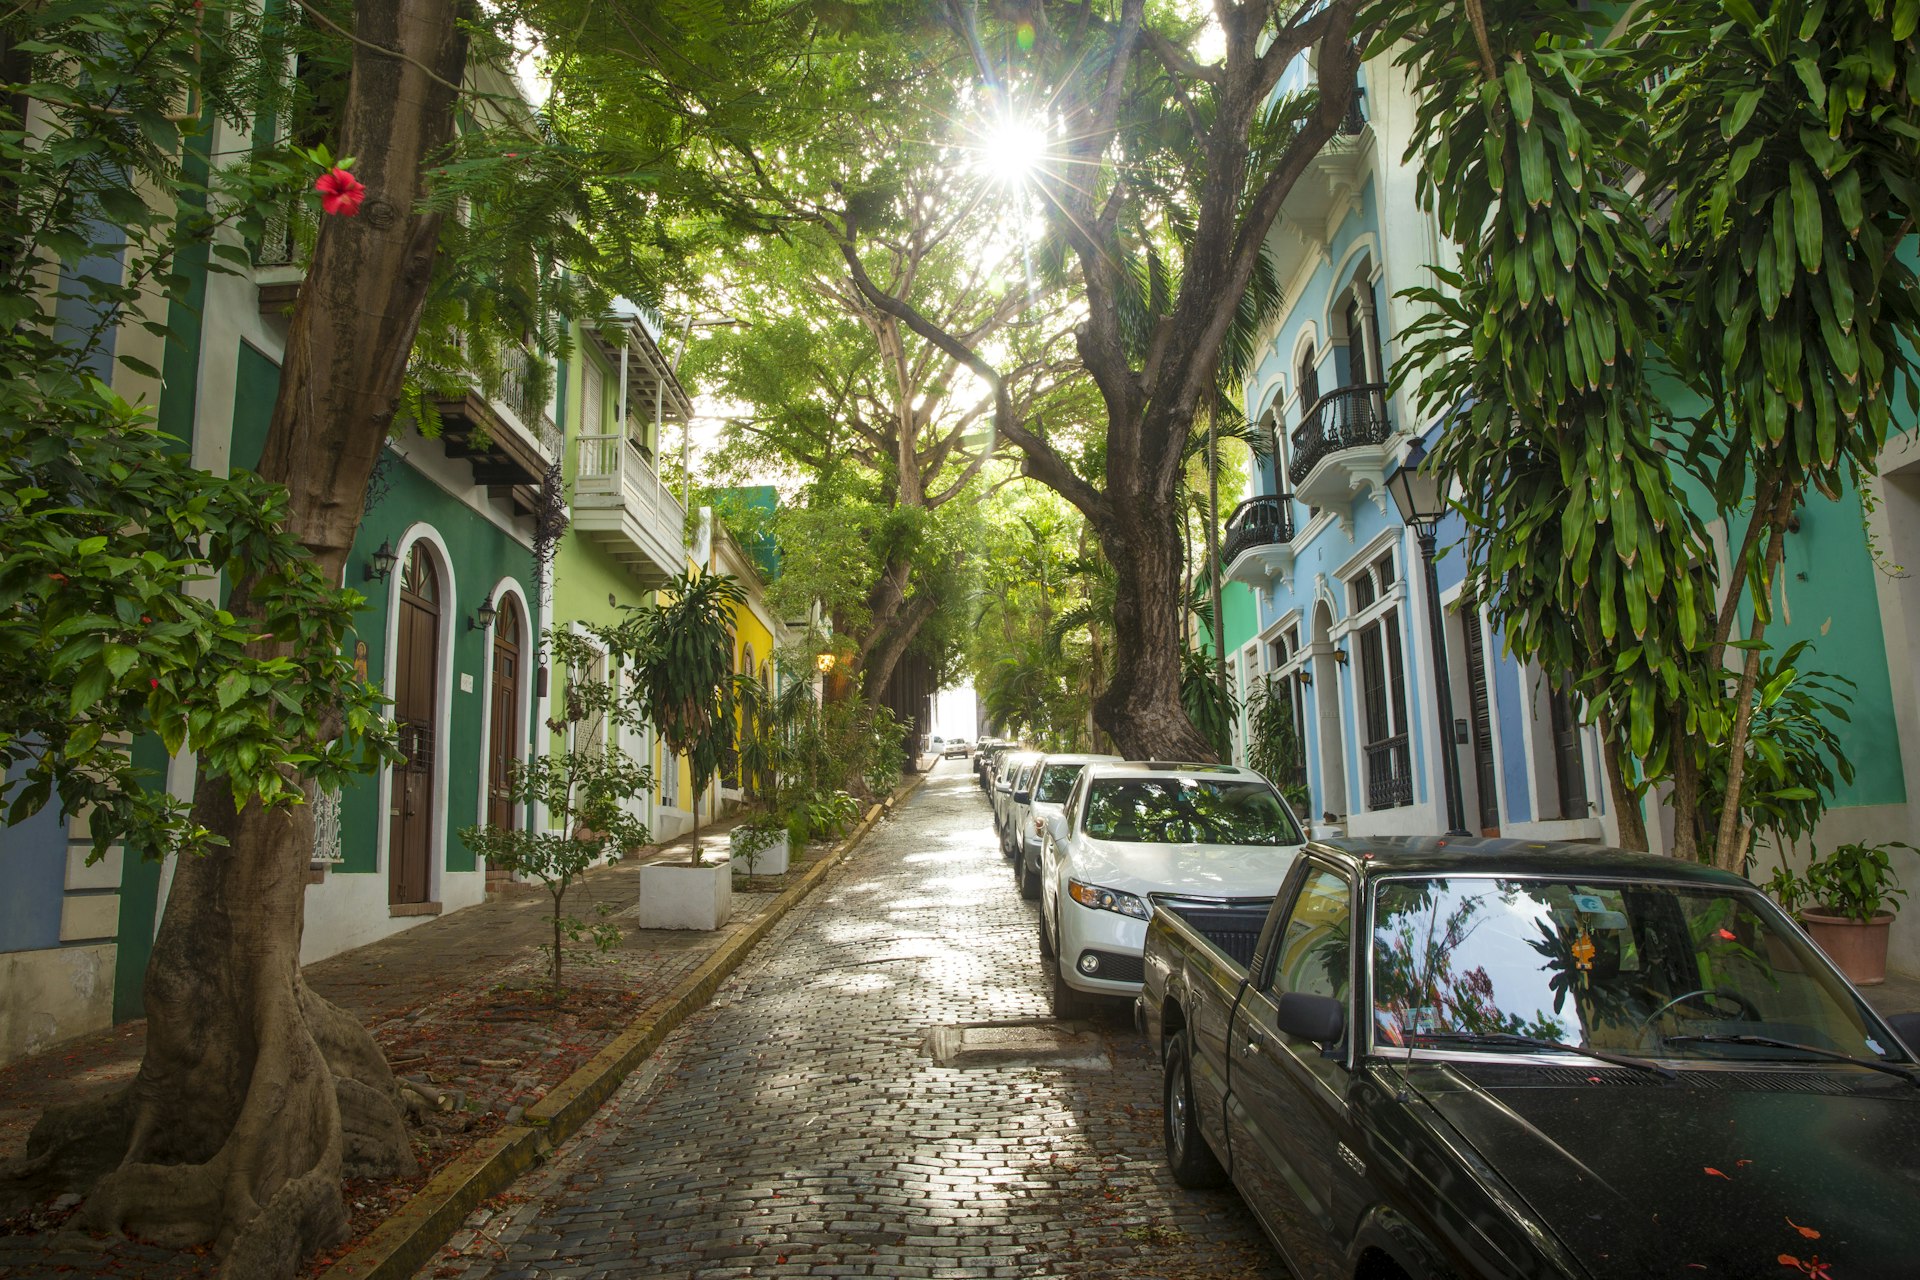 A sloping, historic cobbled street in Puerto Rico's San Juan with cars parked on the right hand side and trees shading the road from the sun